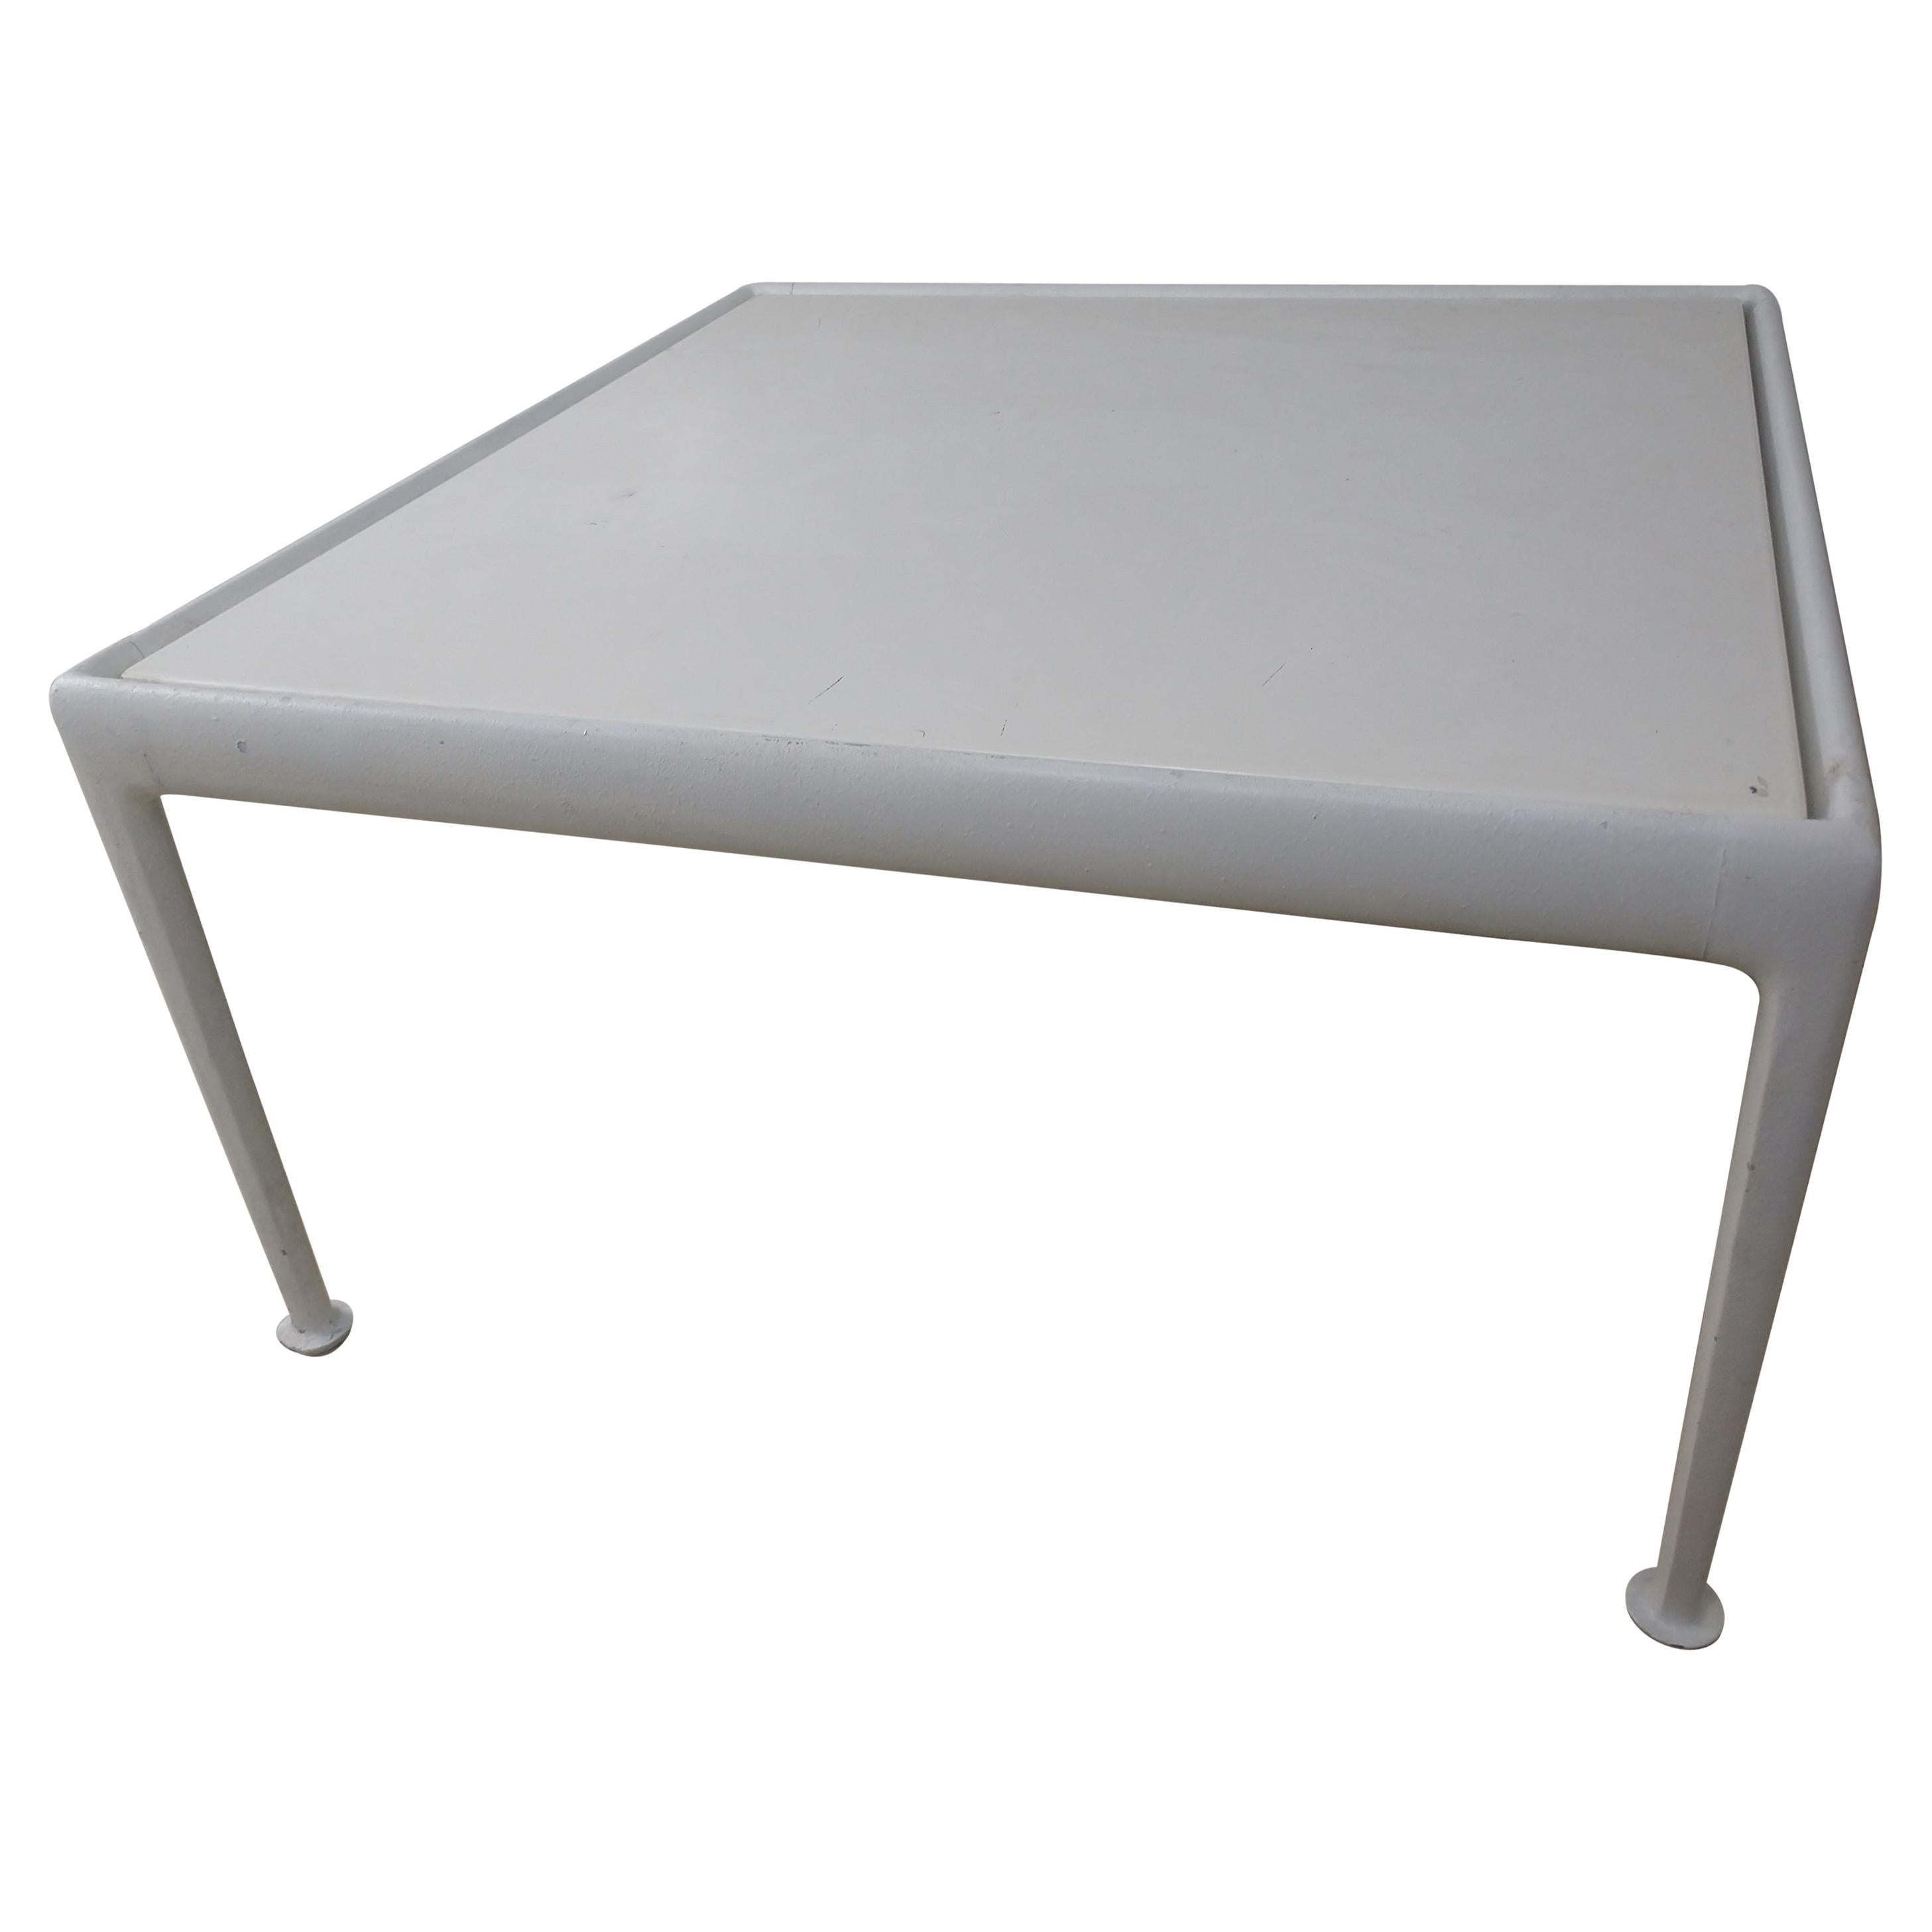 Mid-Century Modern Outdoor Patio Table by Richard Shultz for Knoll